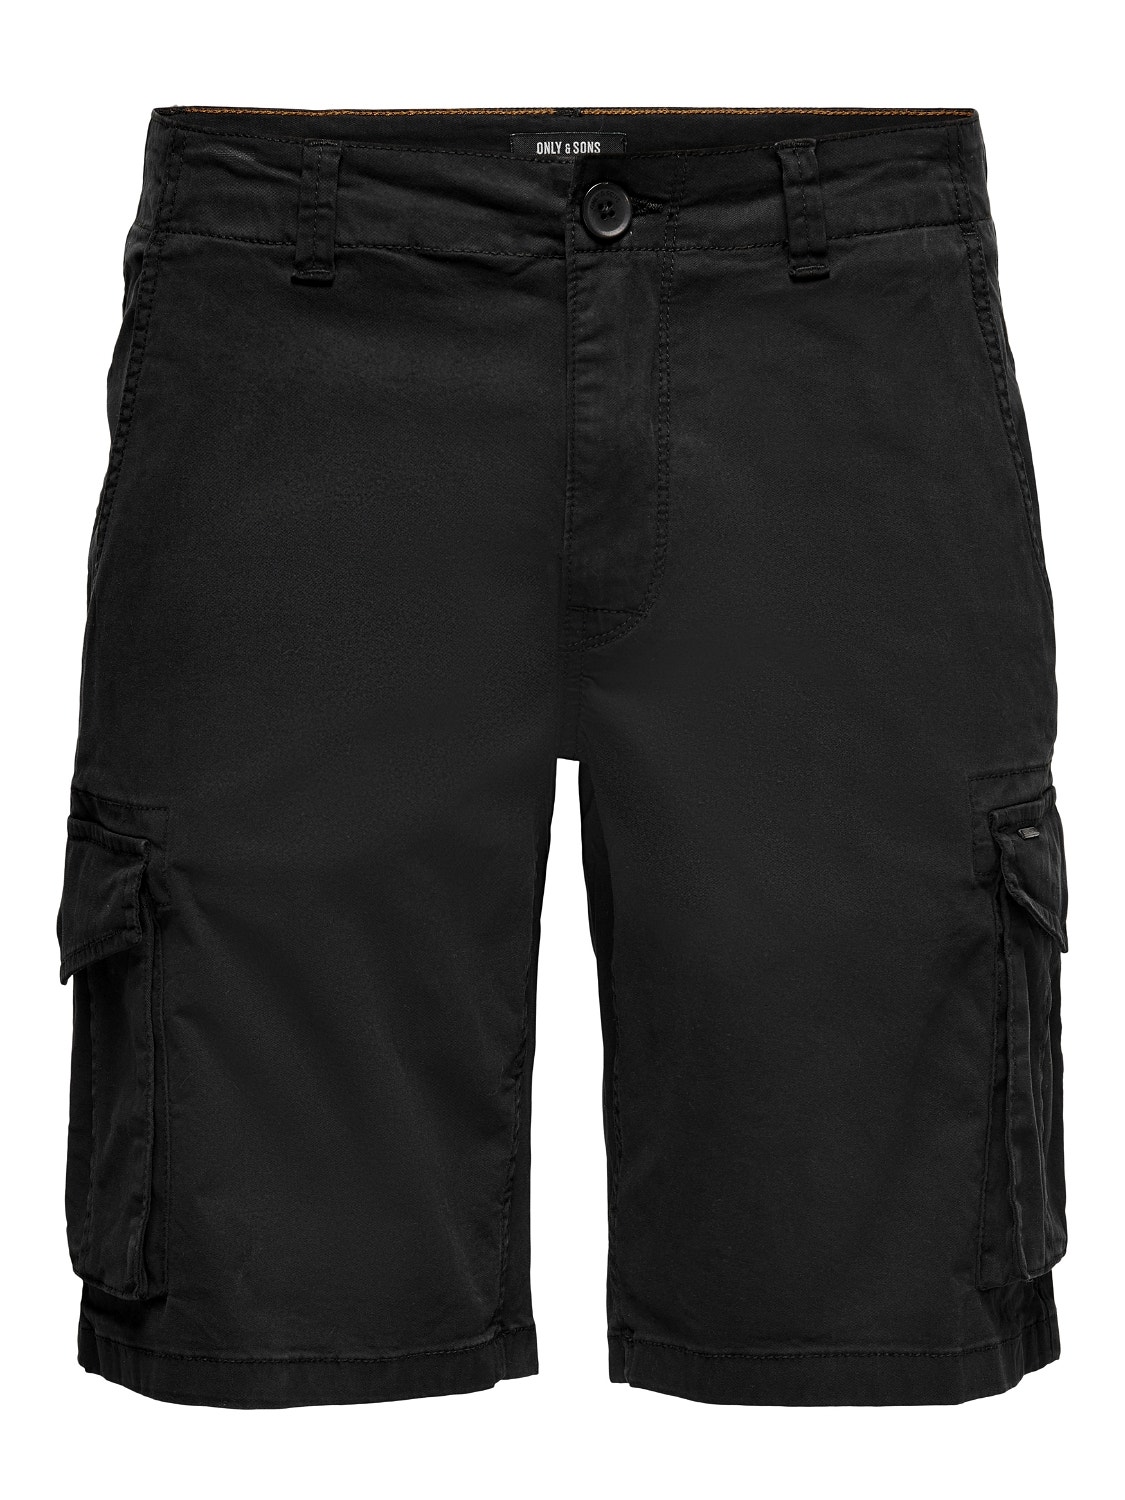 ONLY & SONS Regular Fit Cargo Shorts -Black - 22021459